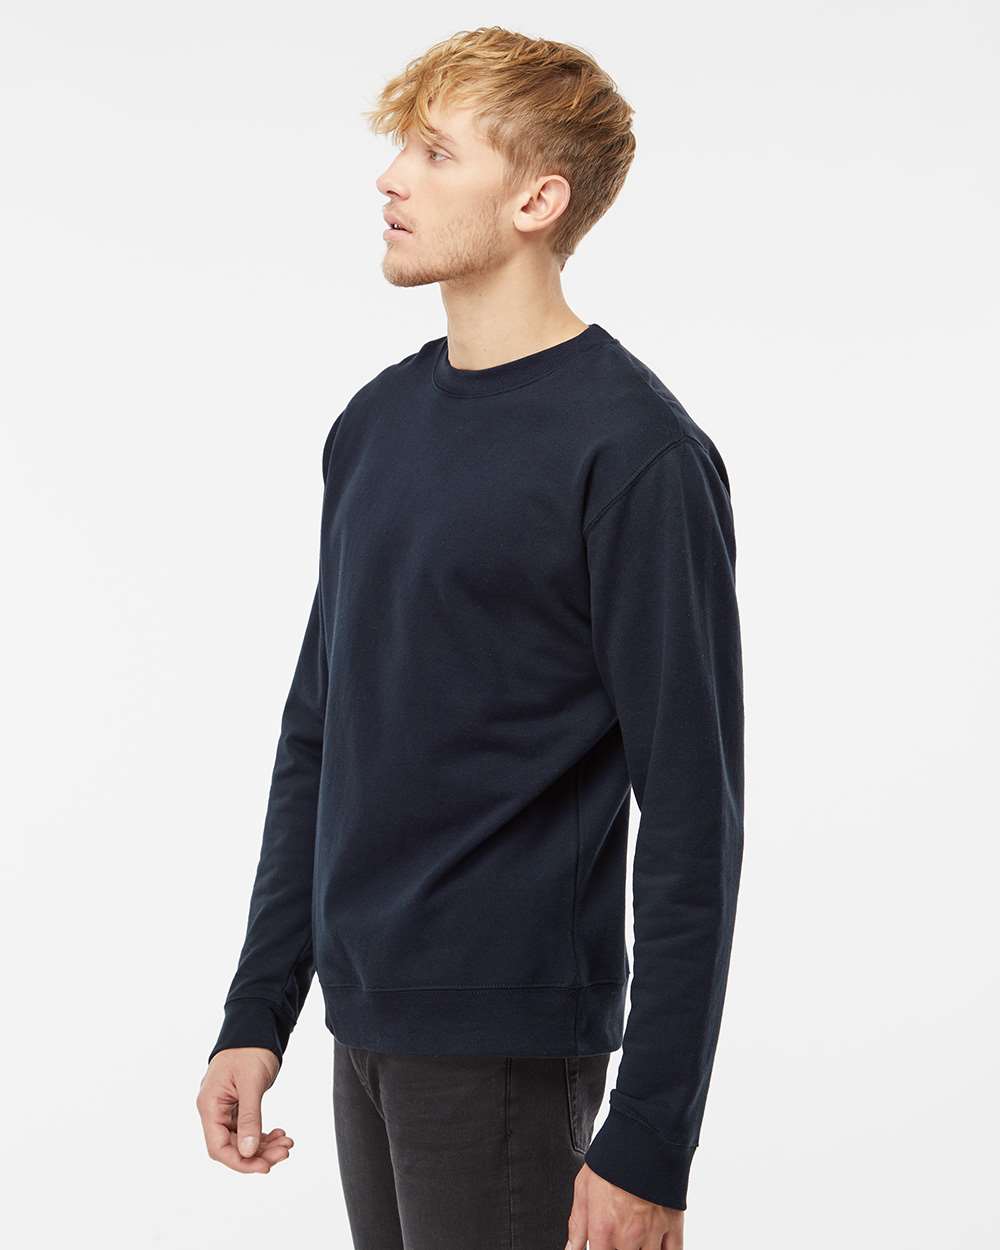 Independent Trading Co. Midweight Sweatshirt SS3000 #colormdl_Classic Navy